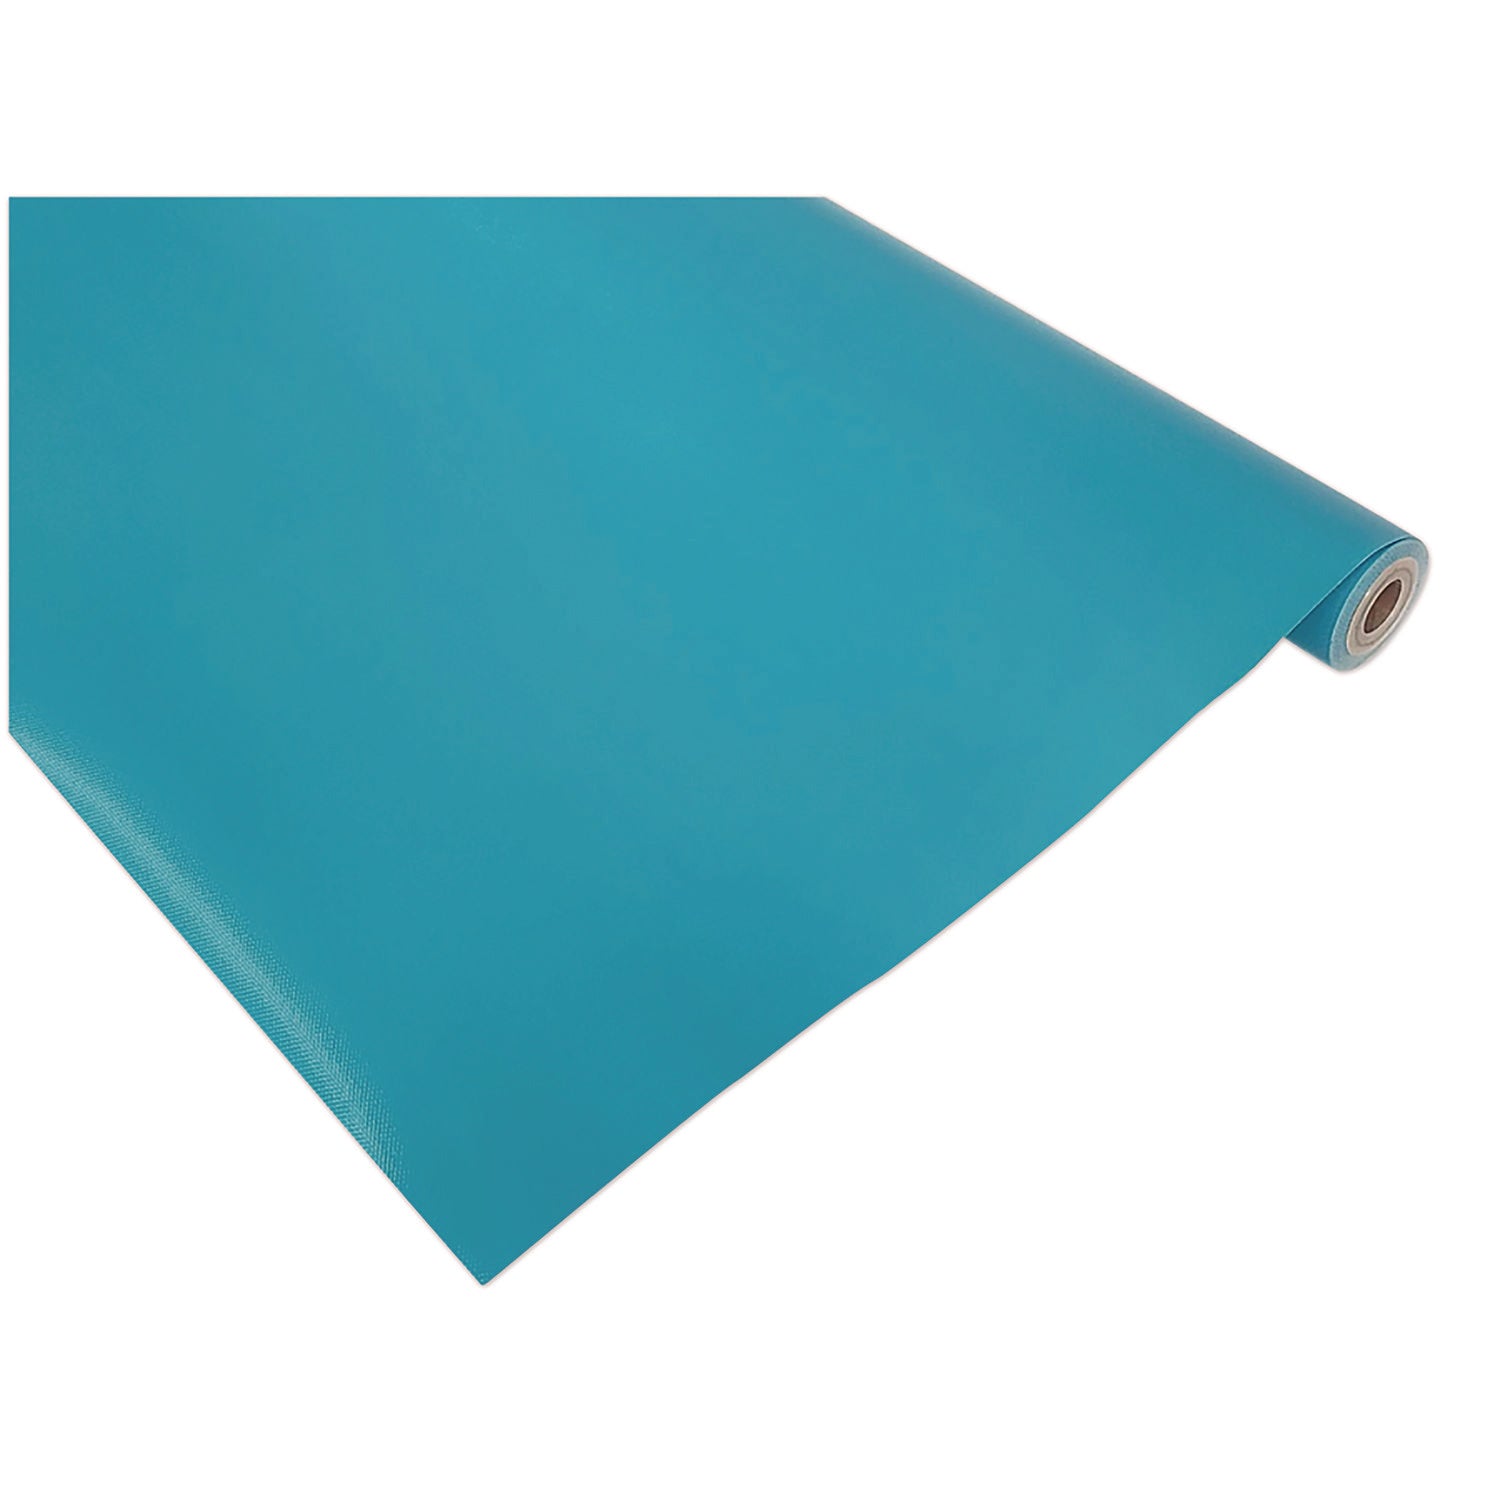 Better Than Paper Bulletin Board Roll, 4 ft x 12 ft, Teal - 3